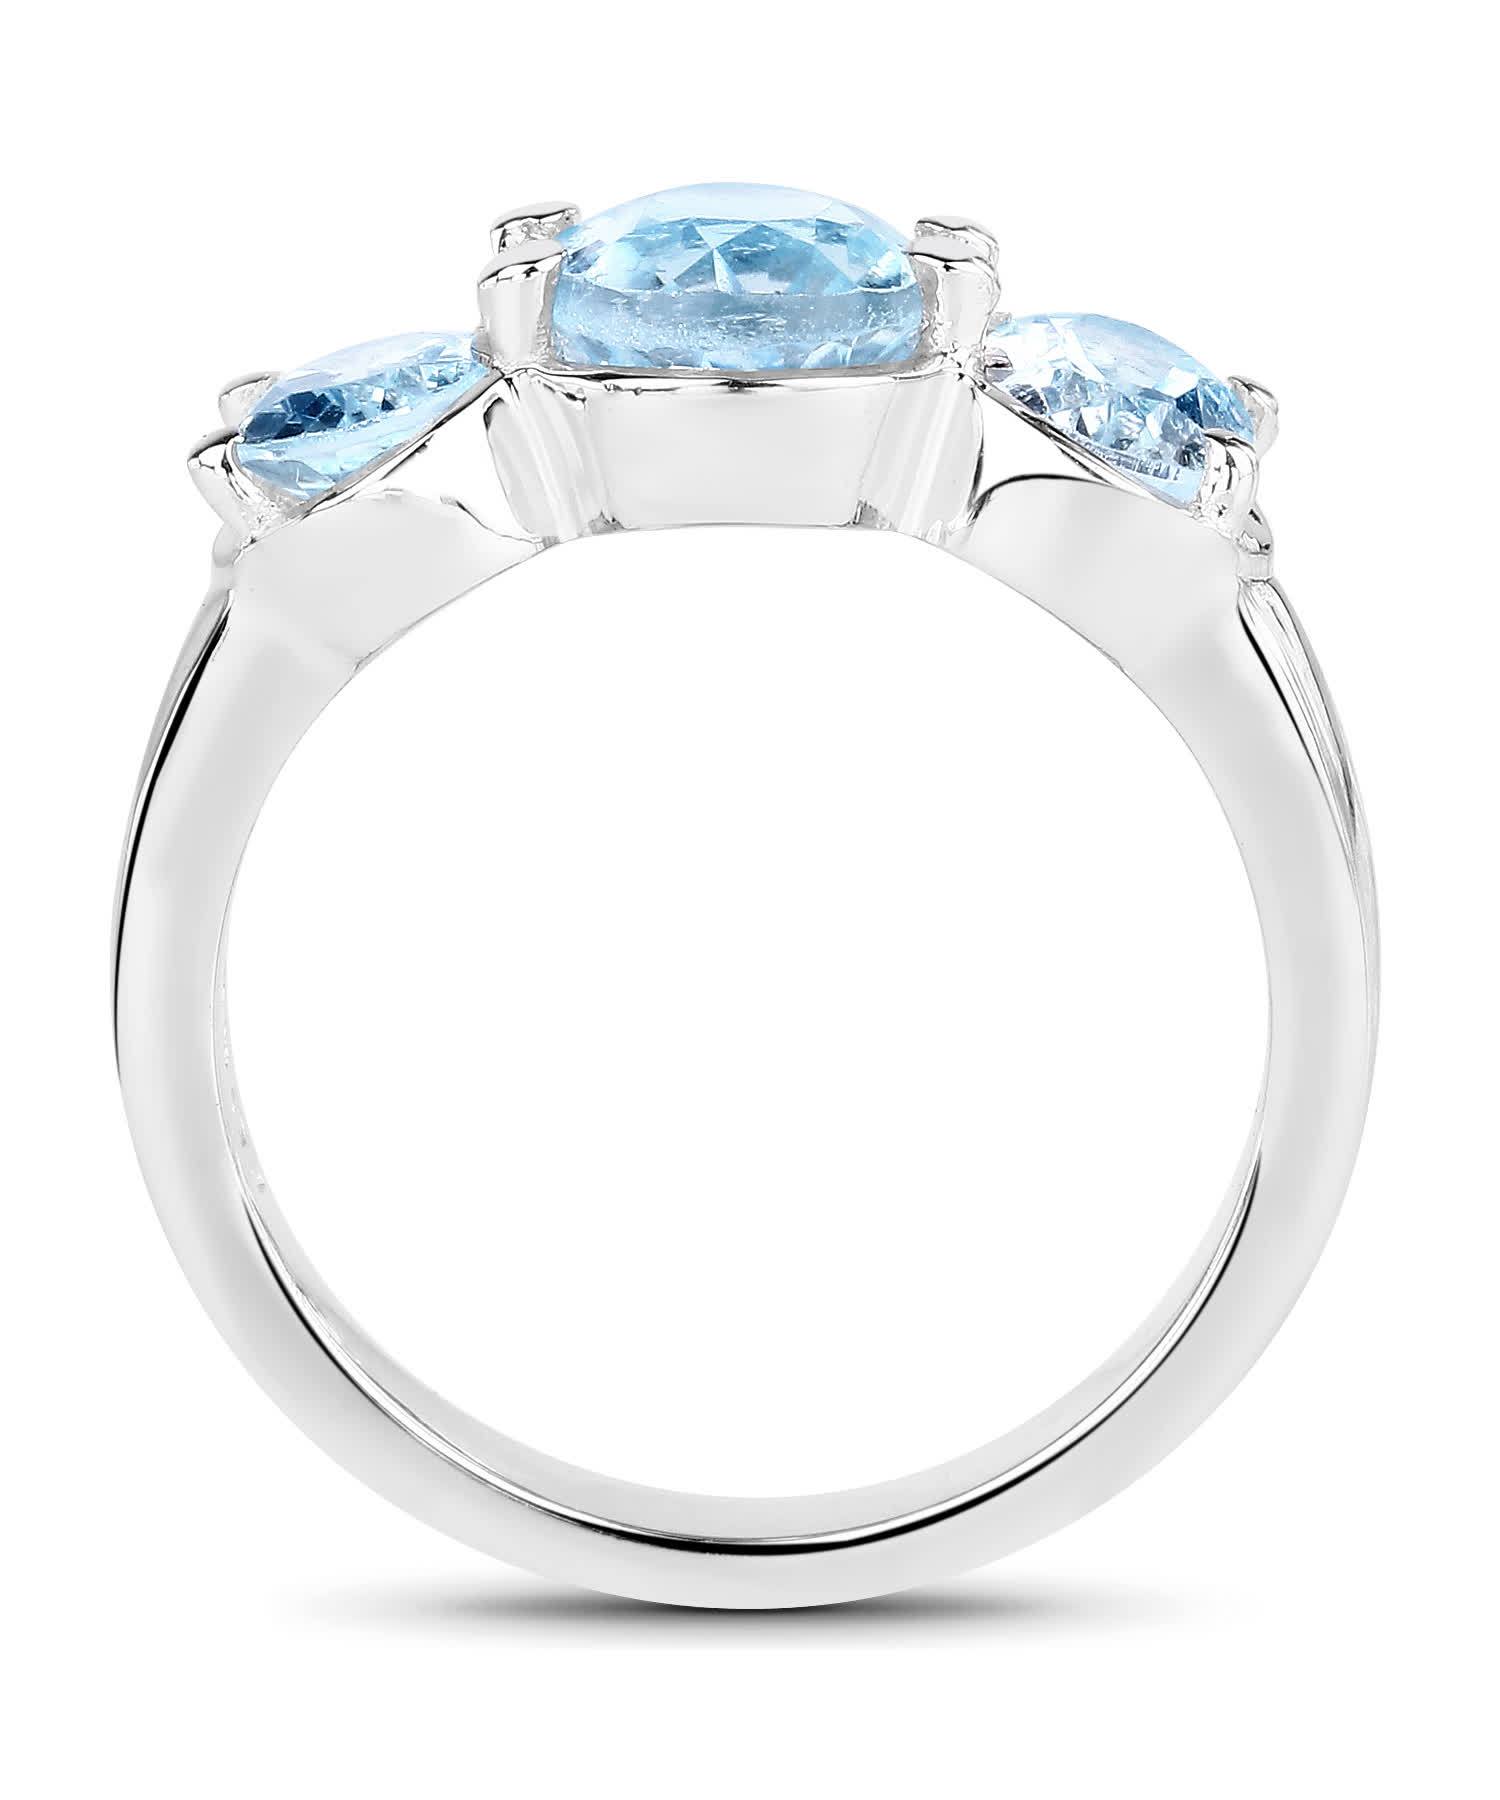 4.40ctw Natural Sky Blue Topaz Rhodium Plated 925 Sterling Silver Classic Three-Stone Ring View 2